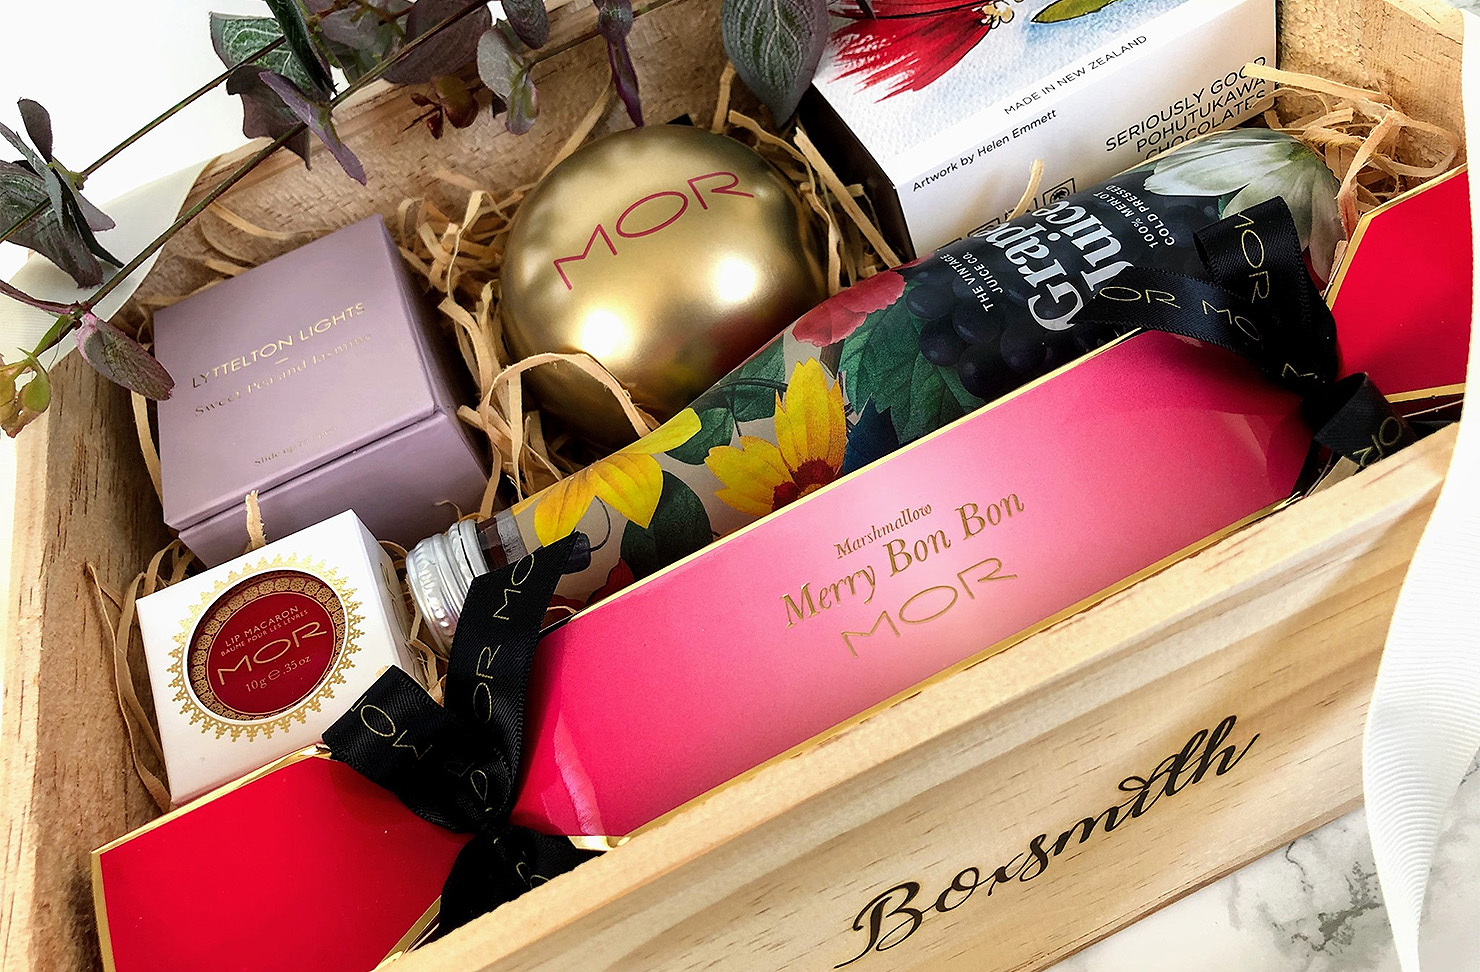 A Christmas gift box from Boxsmith showing a packed box of goodies for Christmastime.